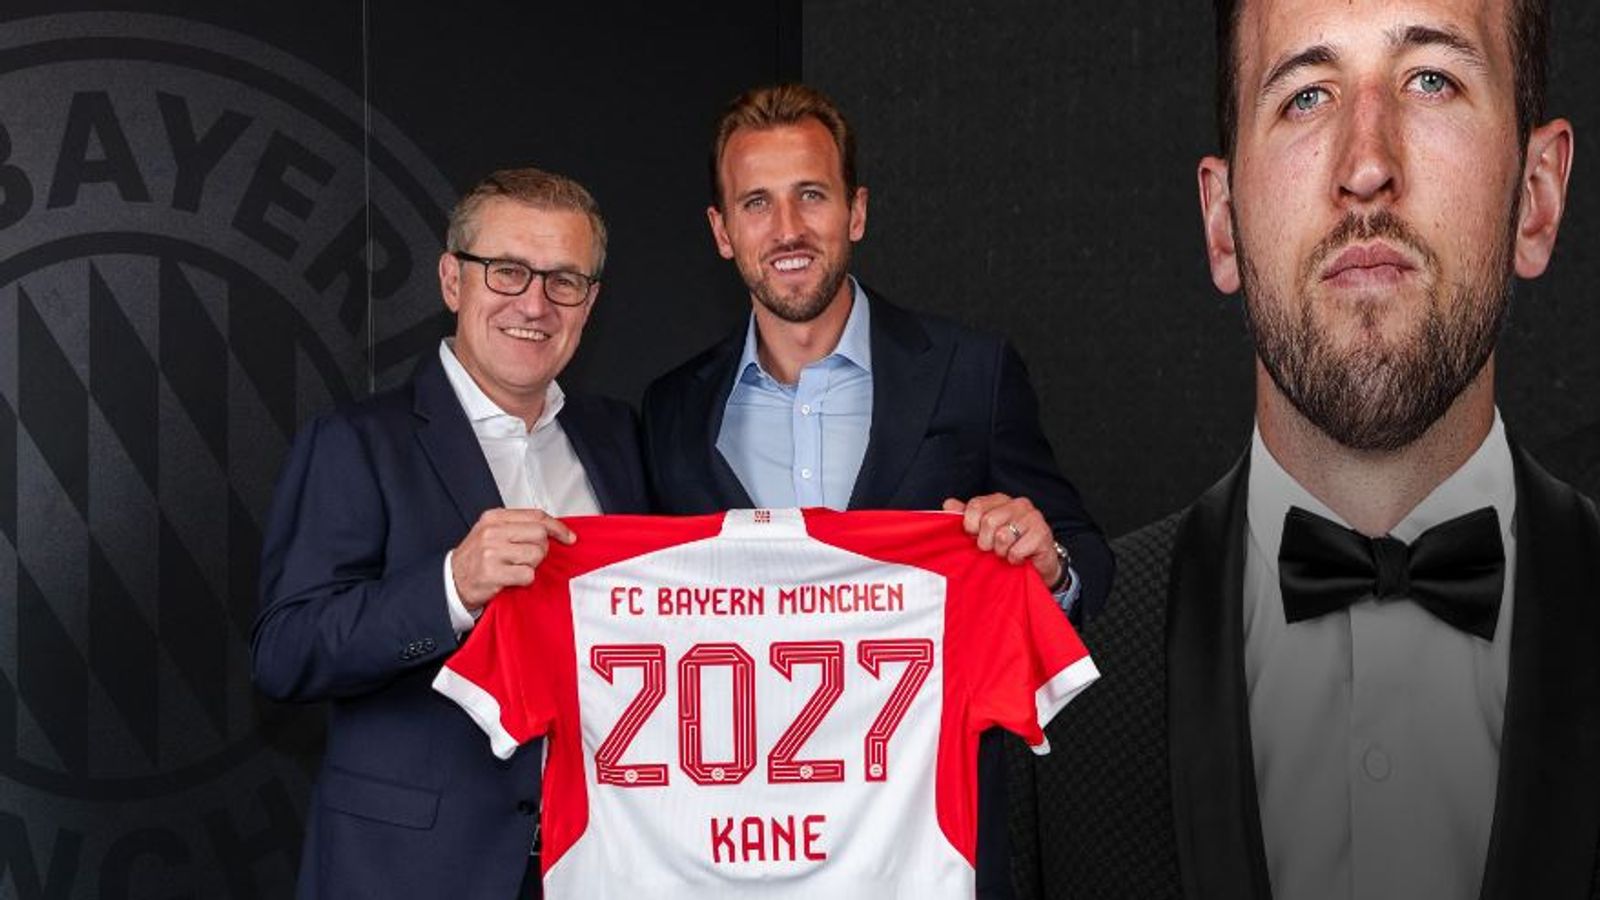 Harry Kane signs for Bayern Munich in reported $126 million transfer